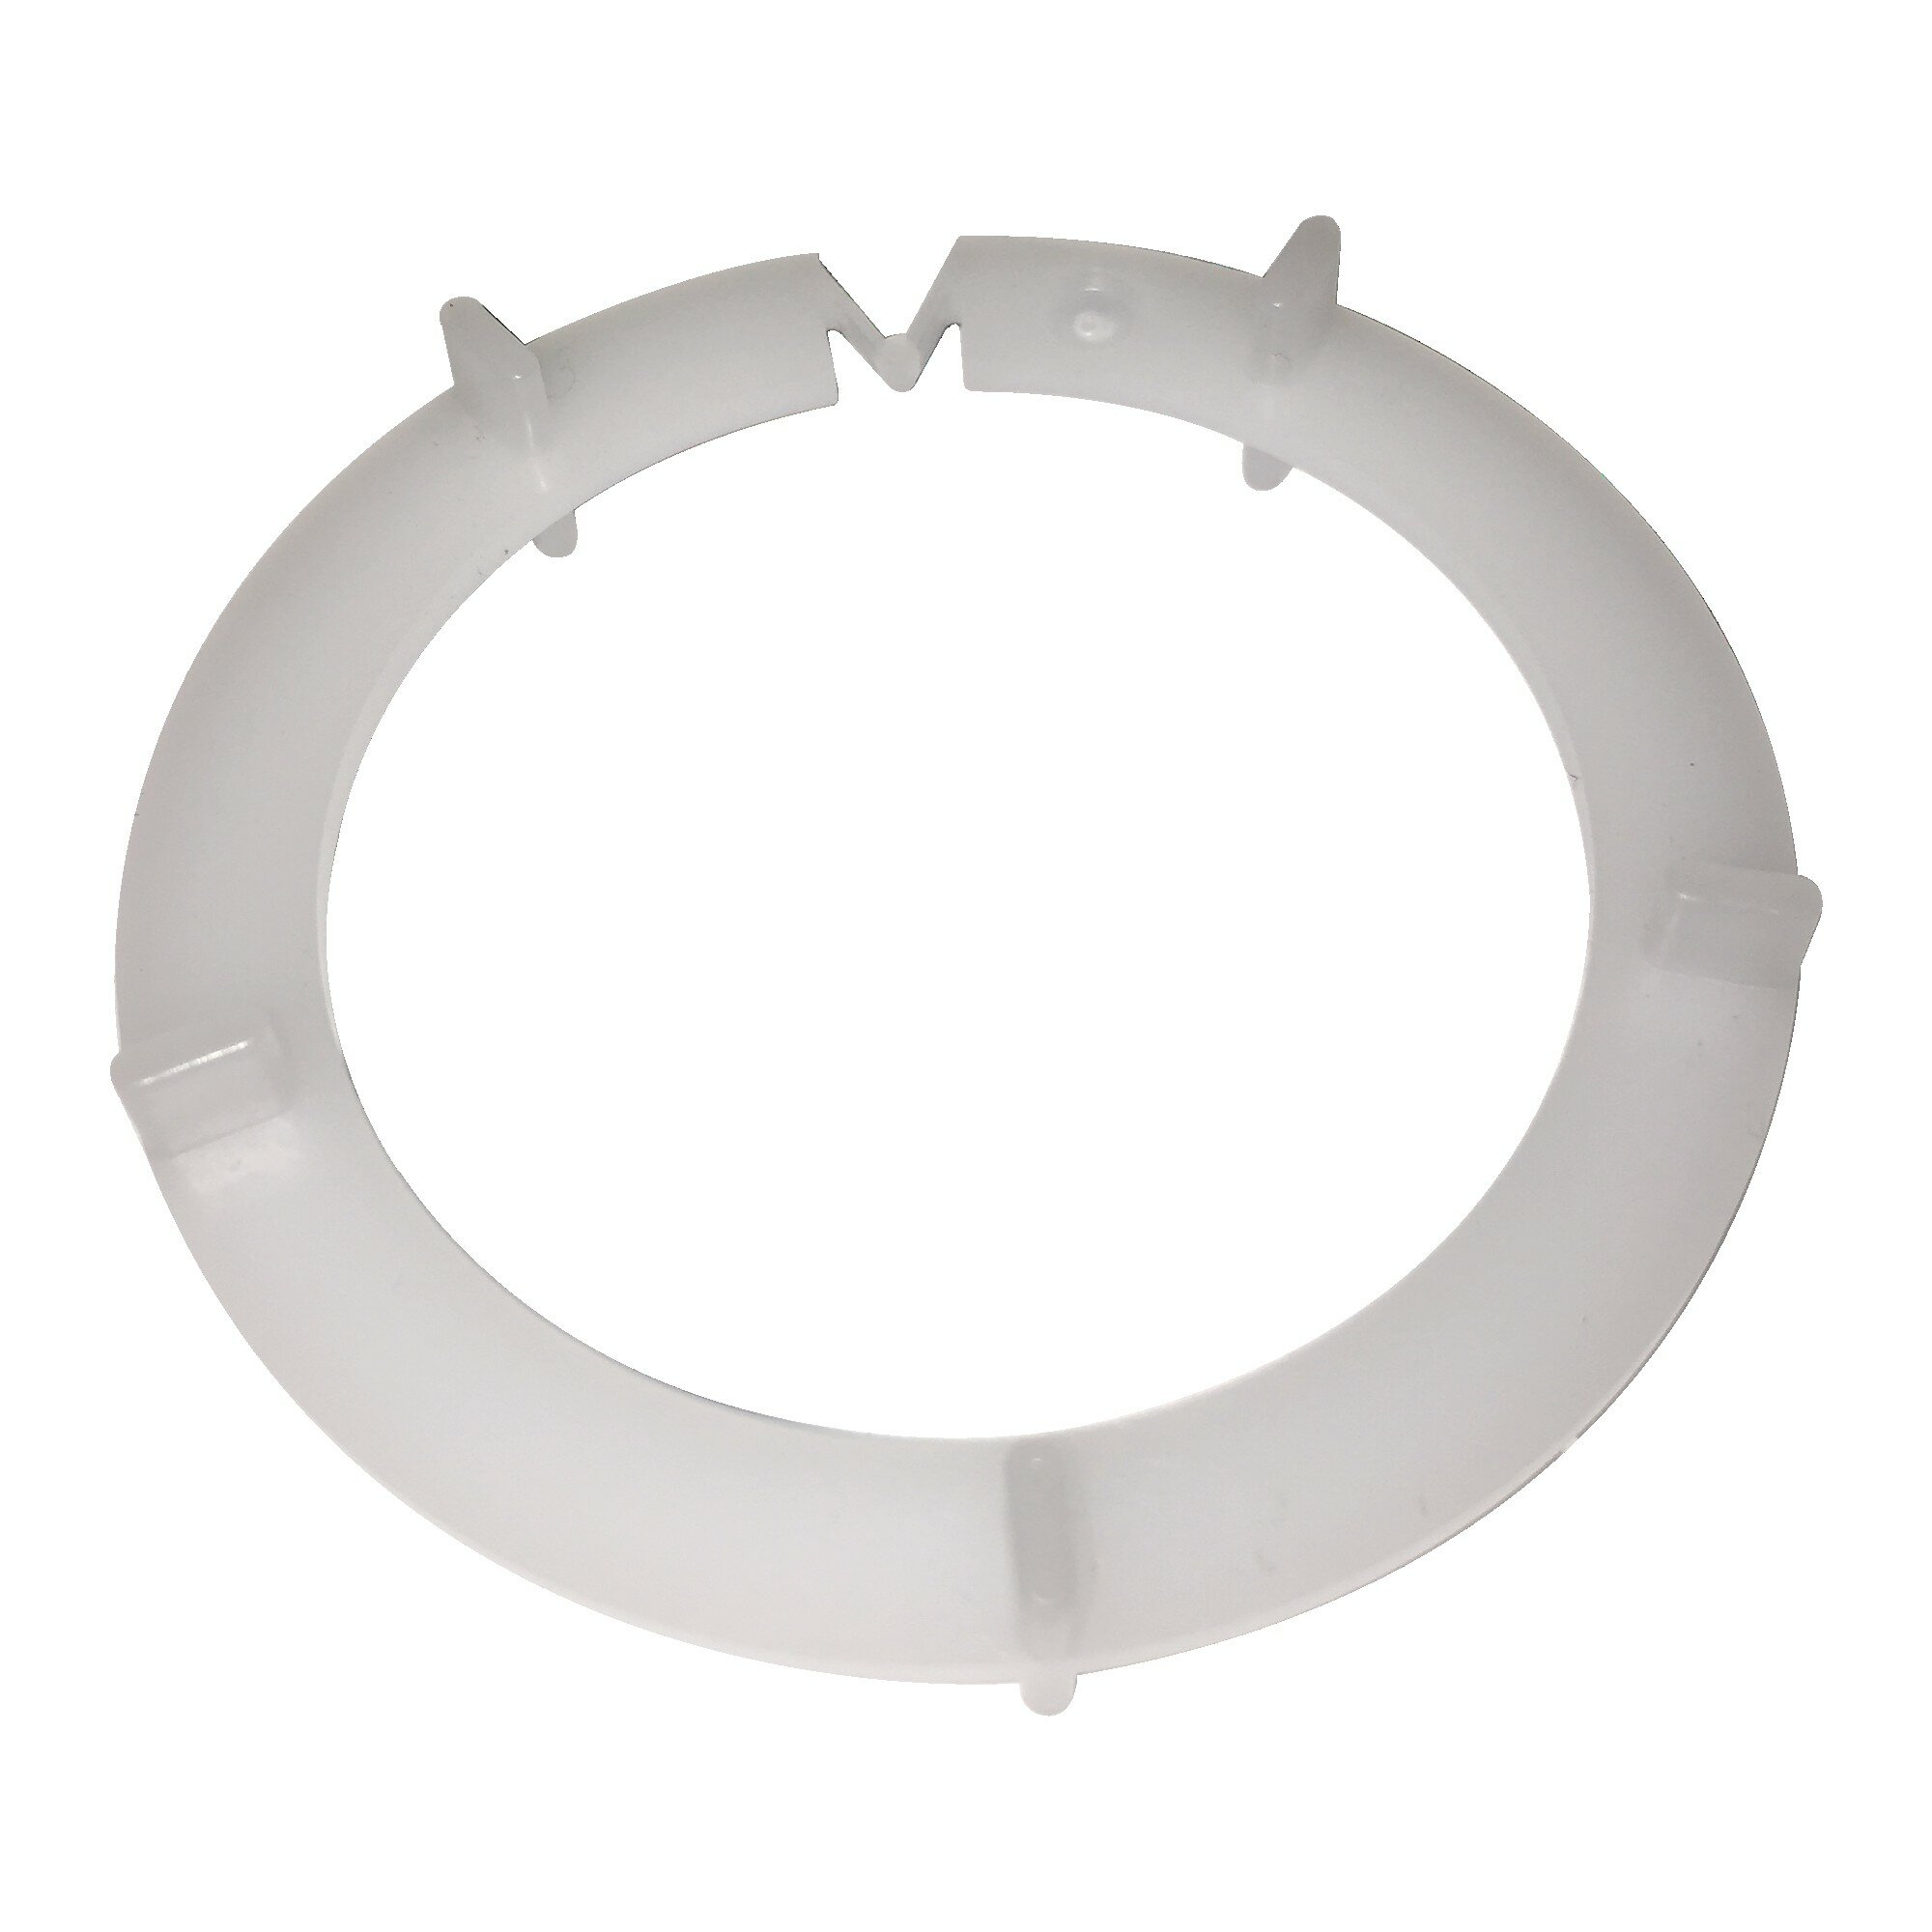 Rp29569 Delta Trim Sleeve Spacer For 1300 1400 Series Shower